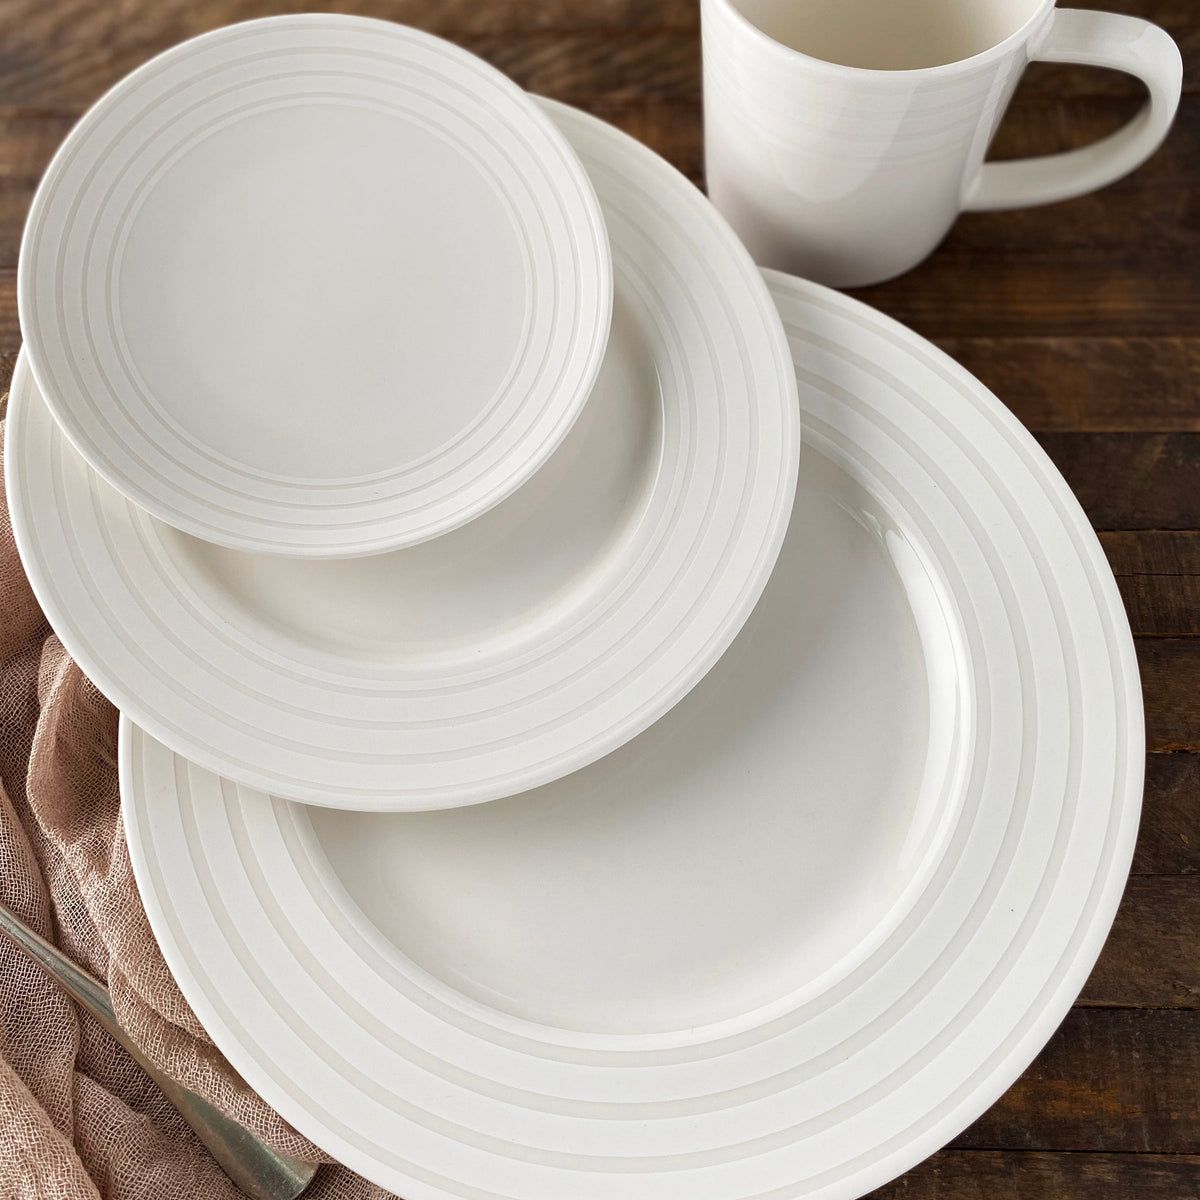 A set of Cambridge Stripe Salad Plates from Caskata Artisanal Home, including a rimmed accent plate, displayed on a wooden table.